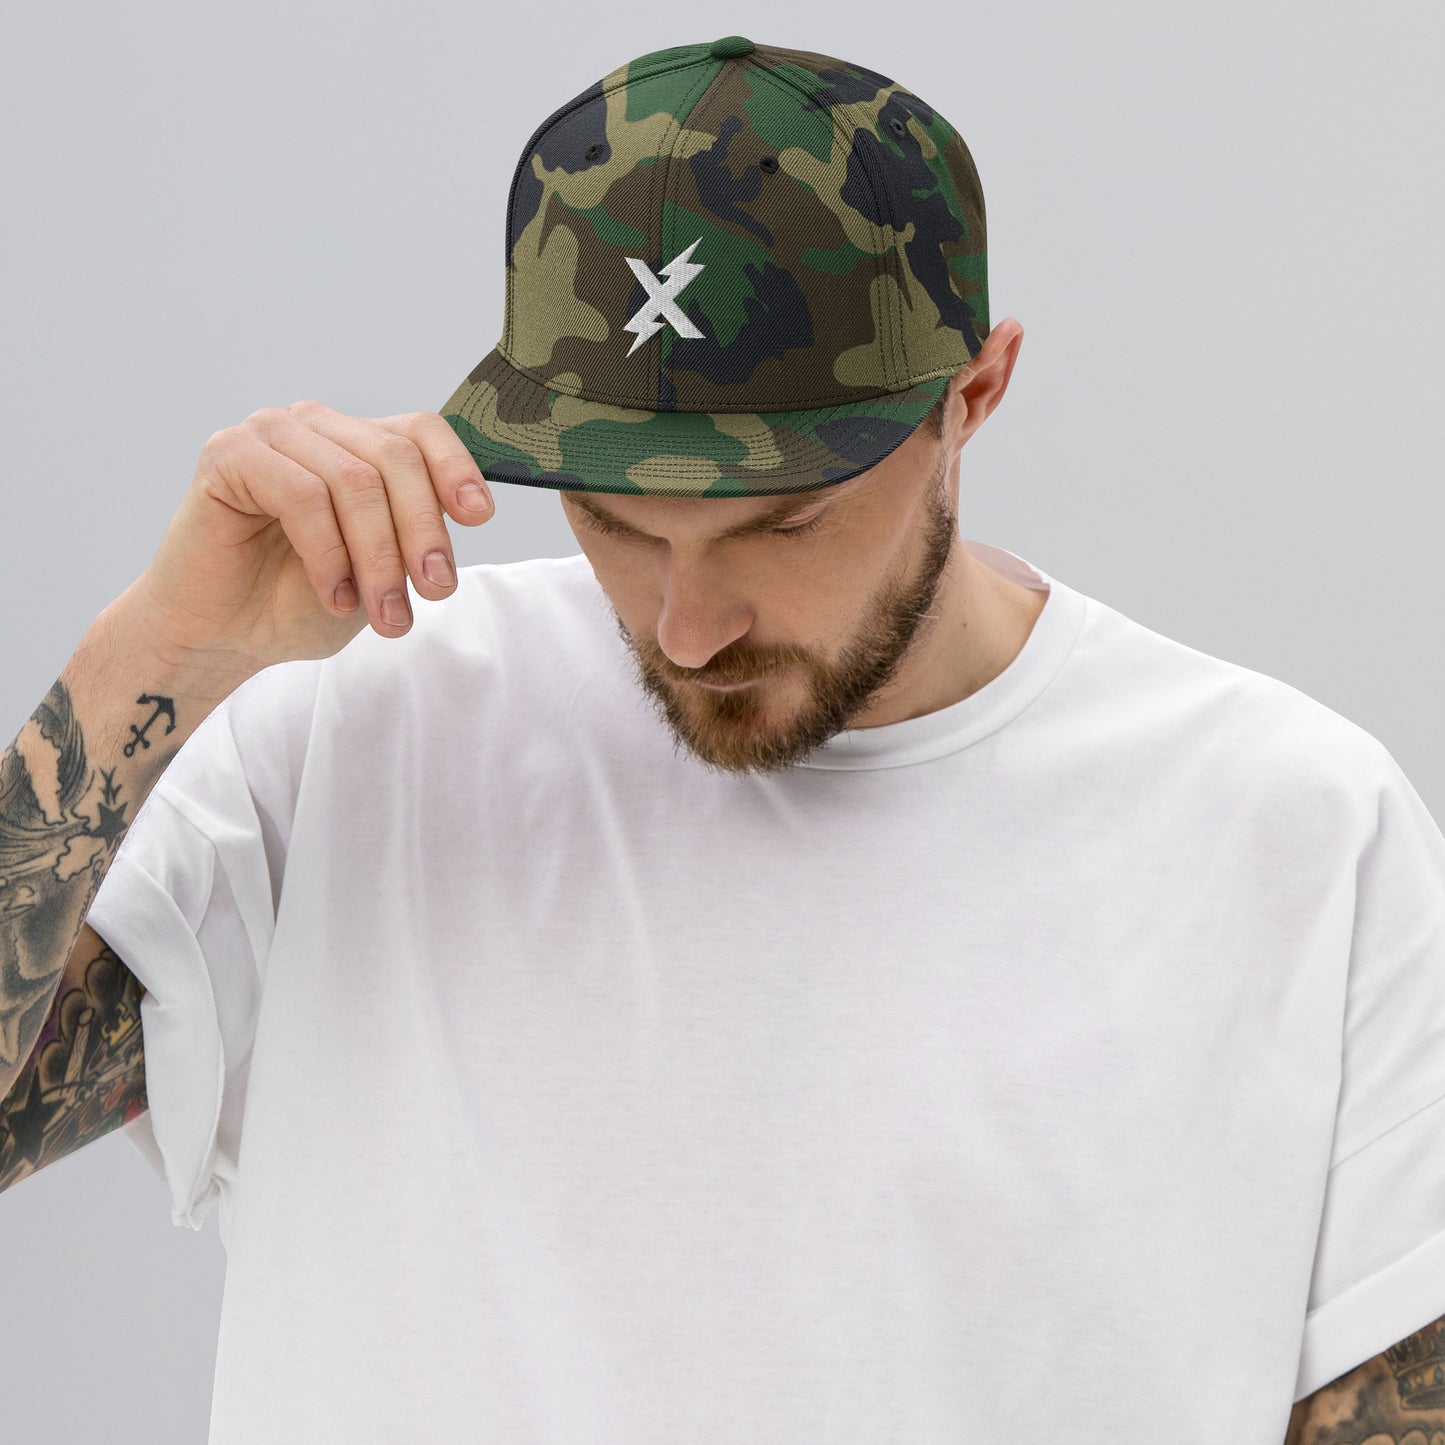 X - Embroidered Snapback Hat